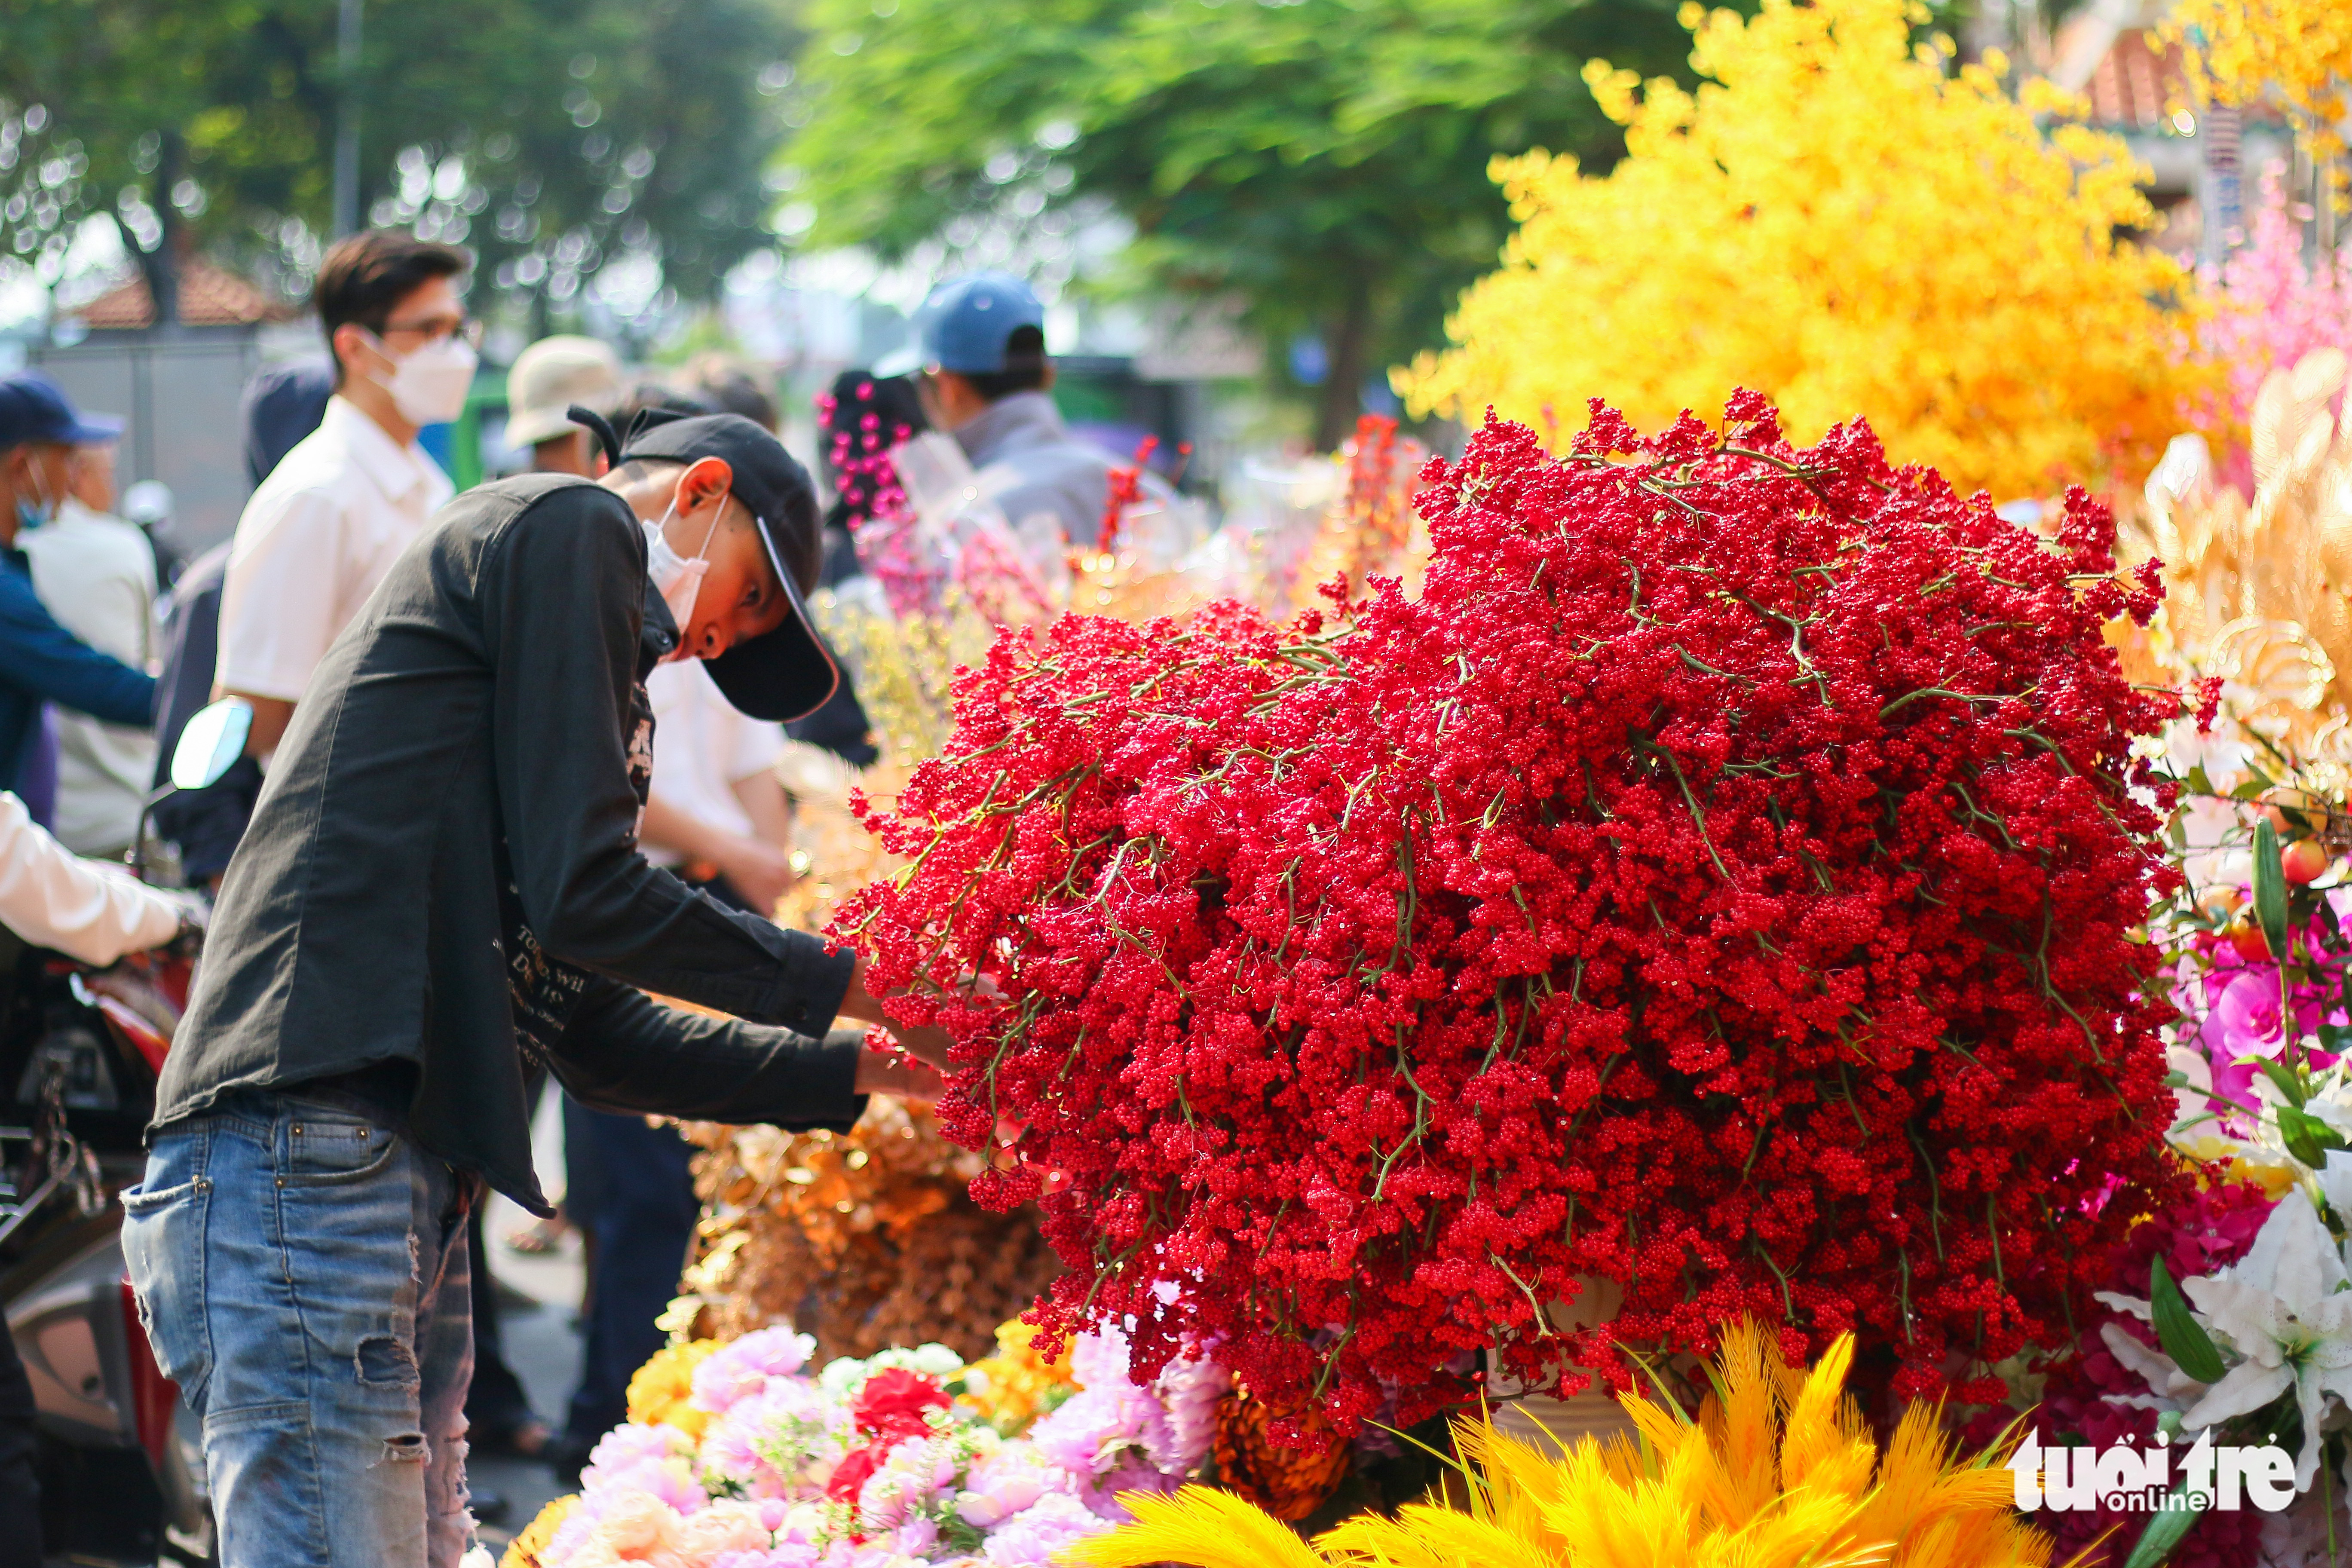 A man shops for artificial plants at 'Tai loc' Market on Hai Thuong Lan Ong Street in District 5, Ho Chi Minh City. Photo: Chau Tuan / Tuoi Tre